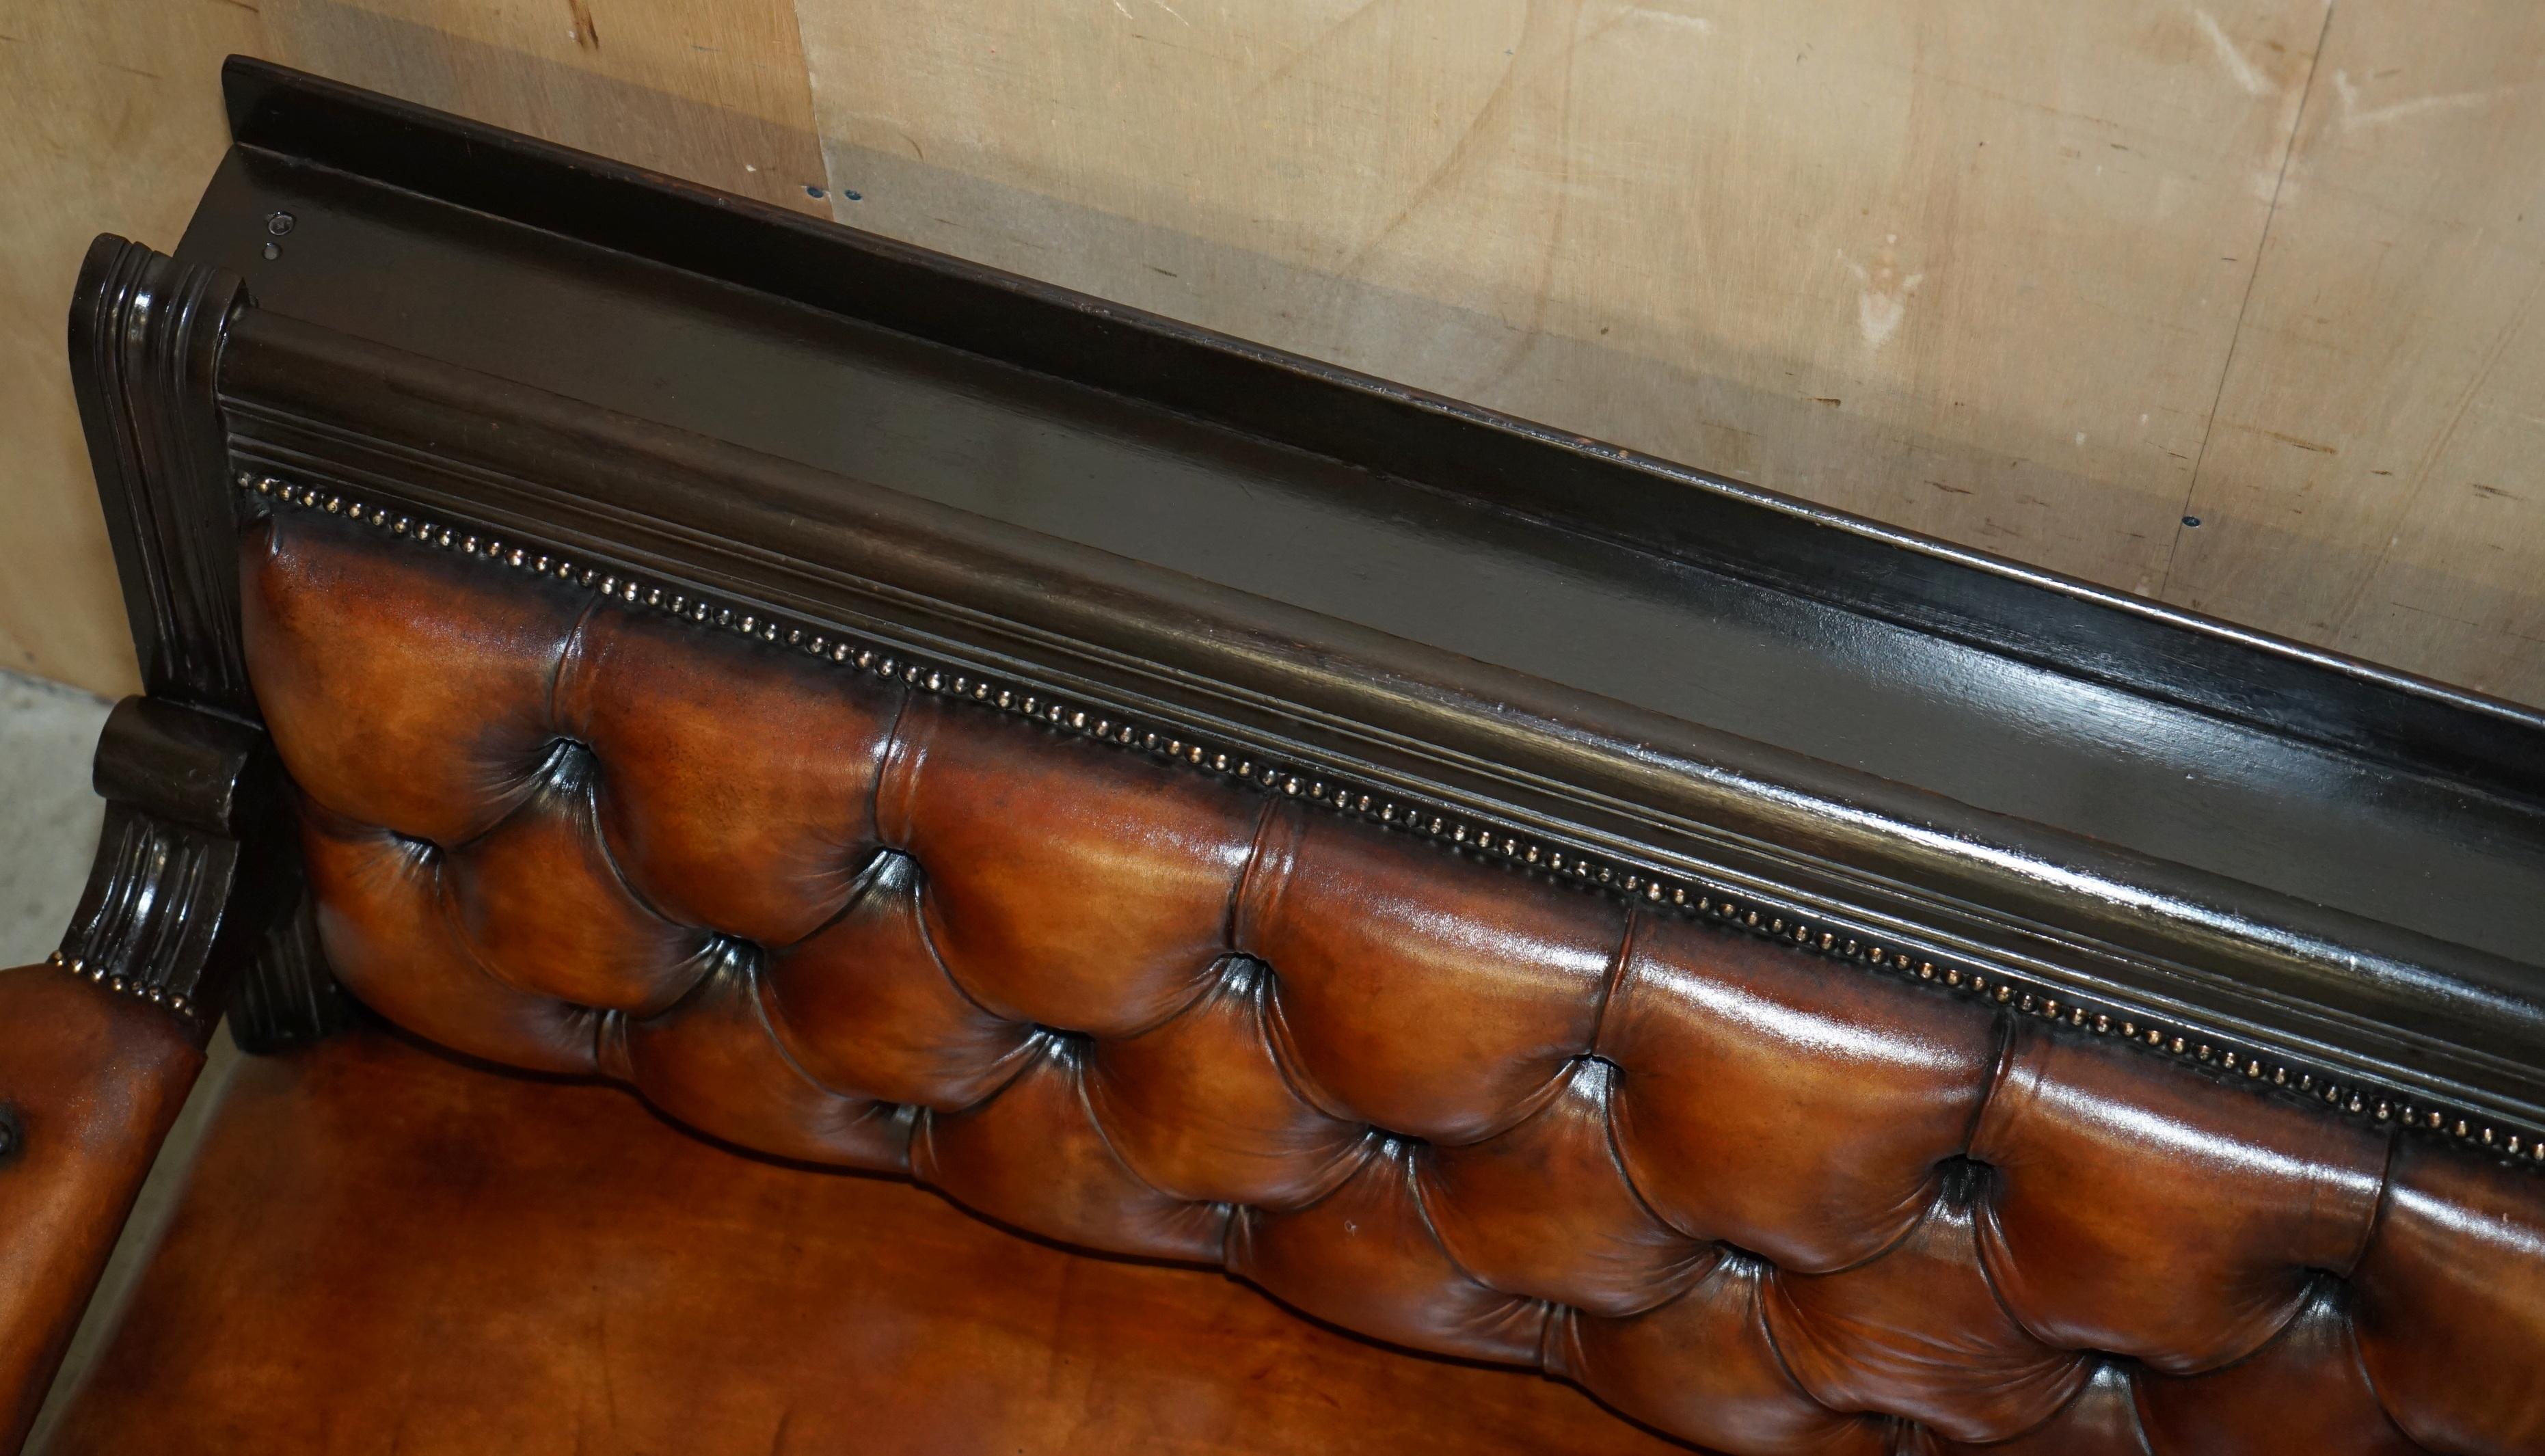 1 OF 4 RESTORED ANTIQUE ViCTORIAN CHESTERFIELD LEATHER SNOOKER HALL PUB BENCHES For Sale 7